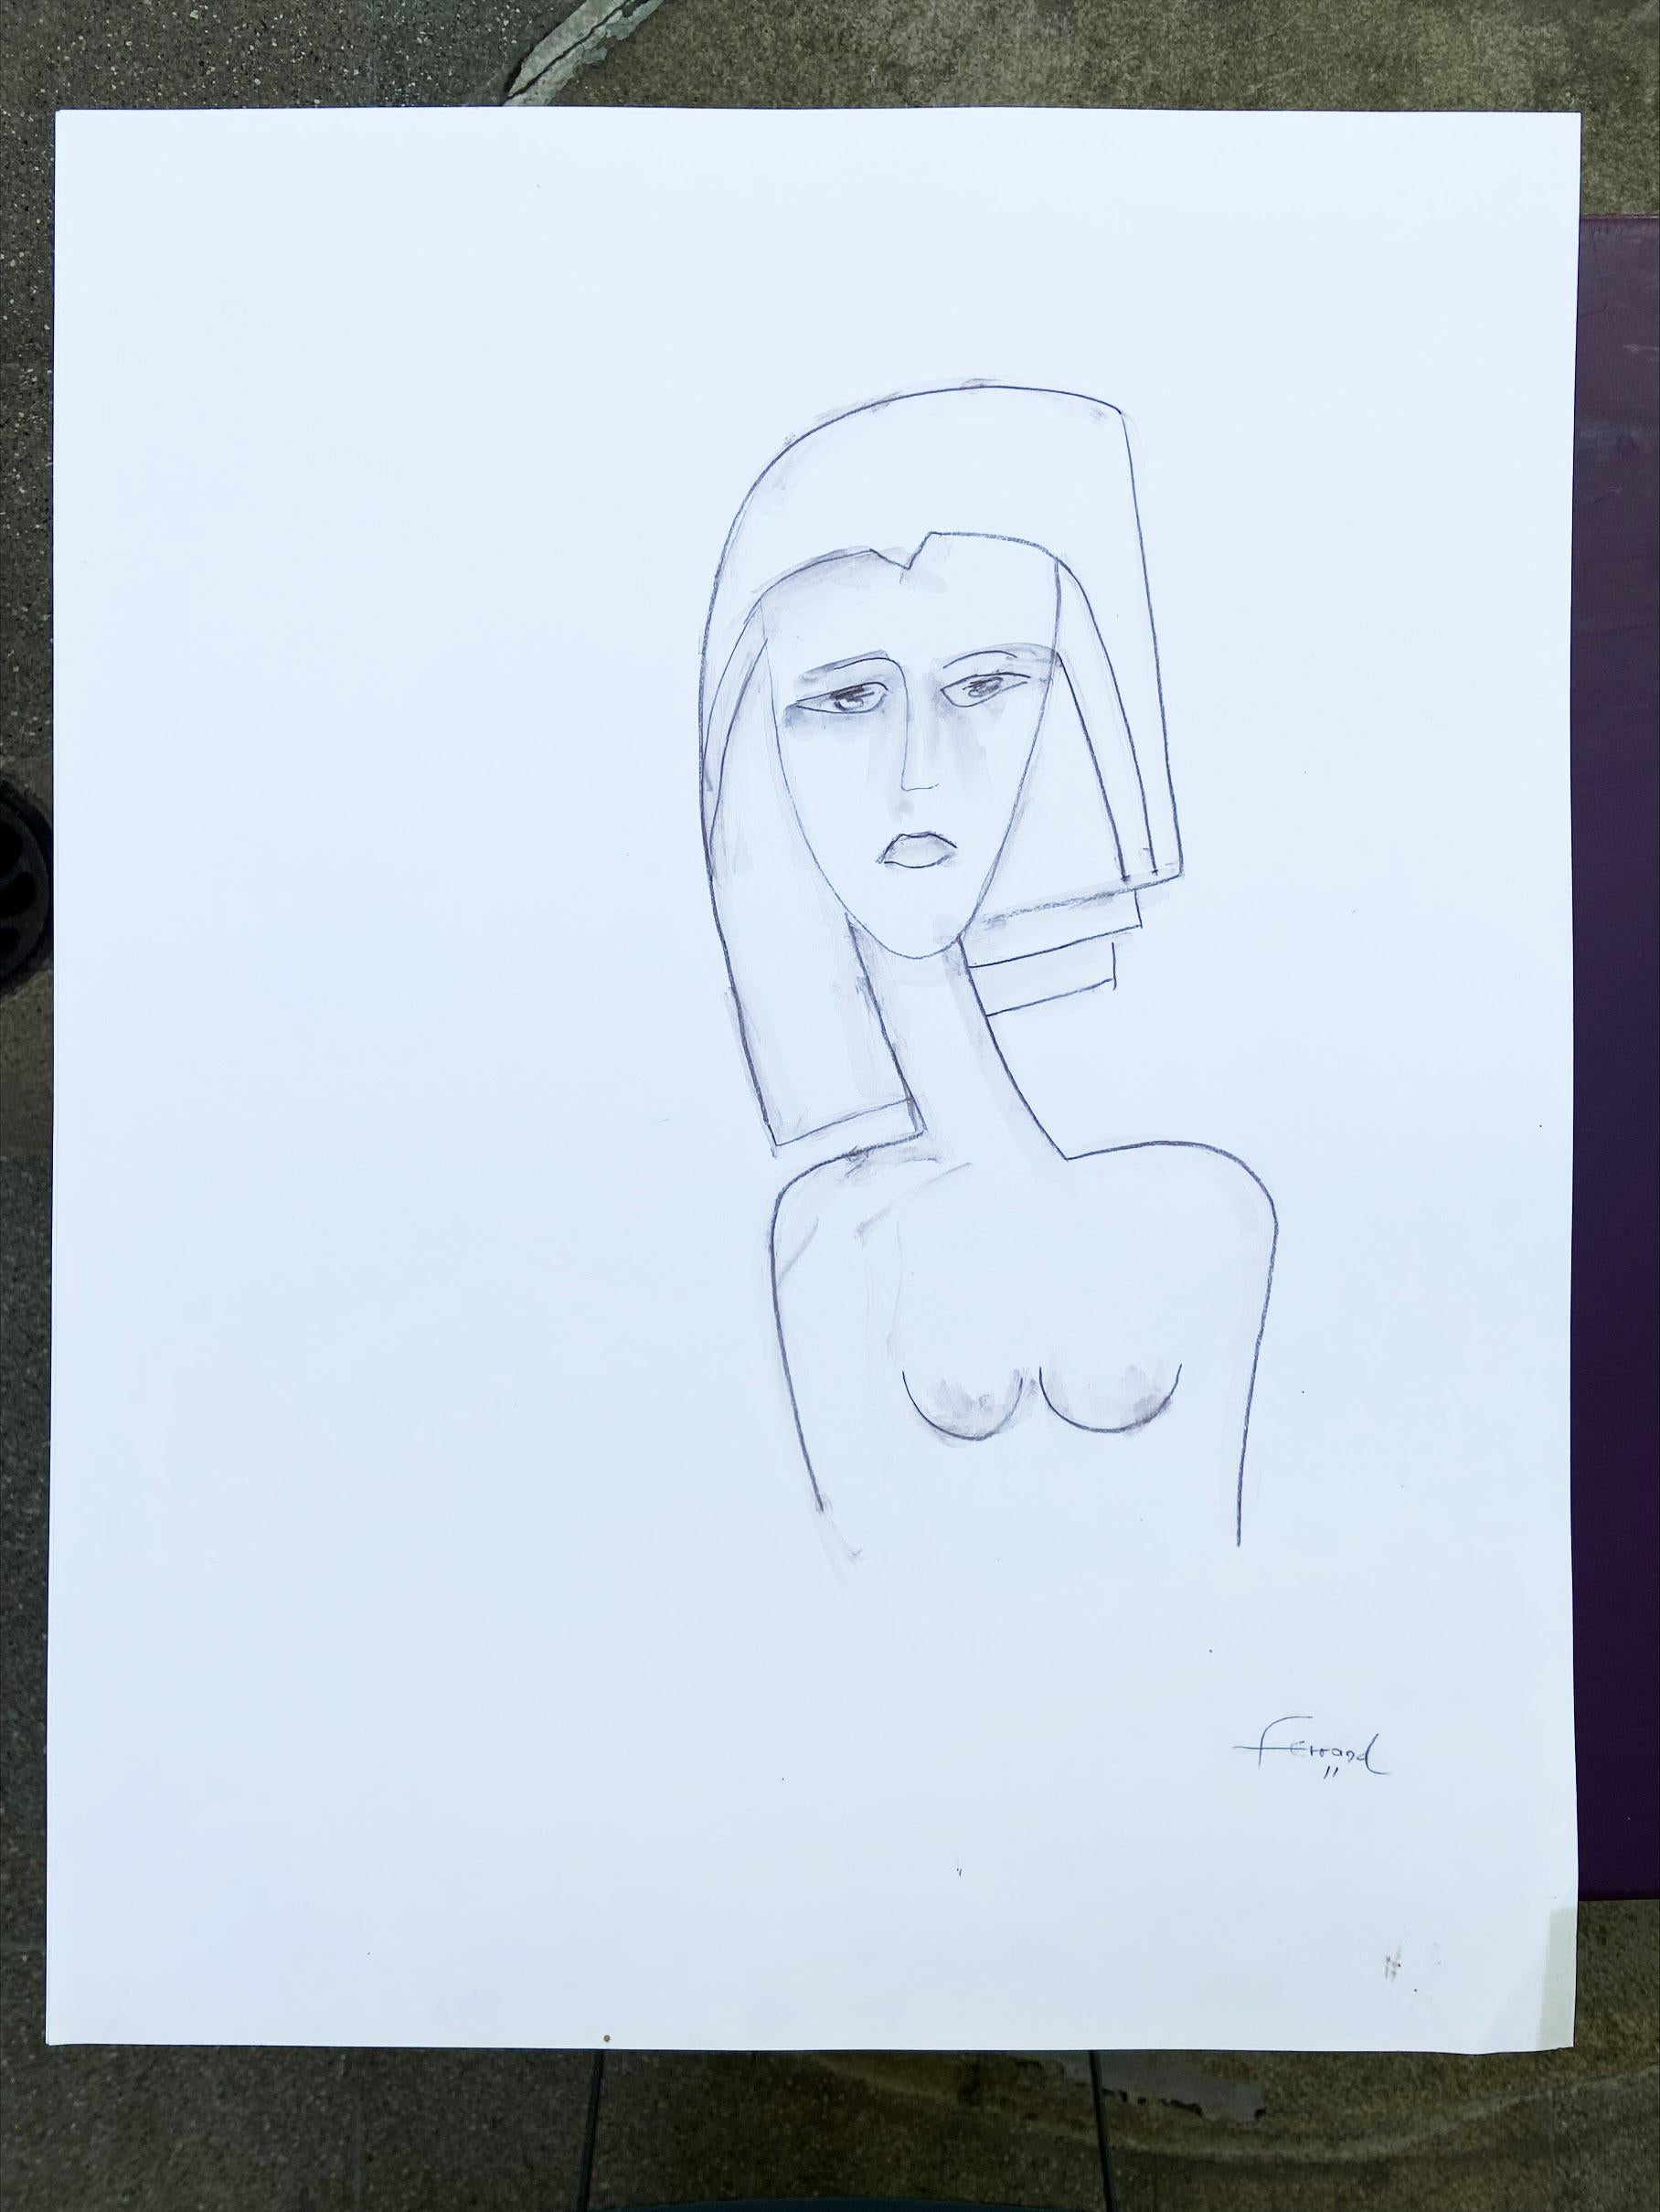 André Ferrand - Portrait 4
51x65
Drypoint pencil on paper 
Signed and dated 2011
390€